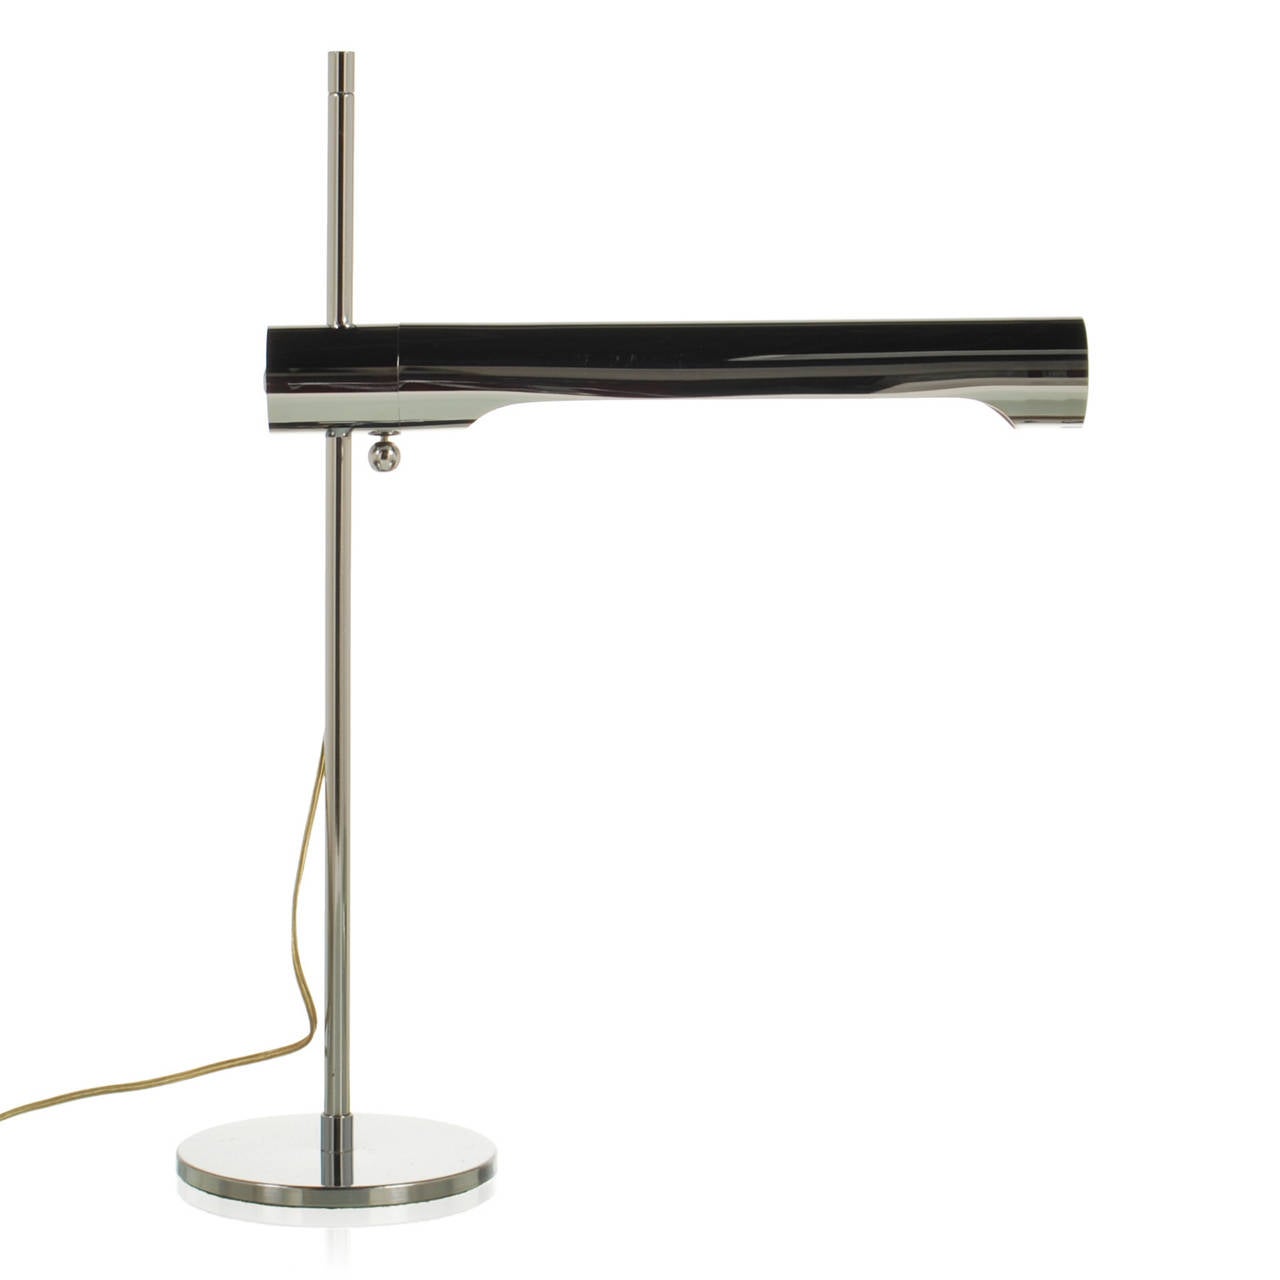 Handsome pair of late Mid-Century Modern desk lamps in chrome. These are very well made and have adjustable lamps that slide up or down the post. Although similar to a lamp made by Walter Von Nessen, we attribute these to Robert Sonneman due to the